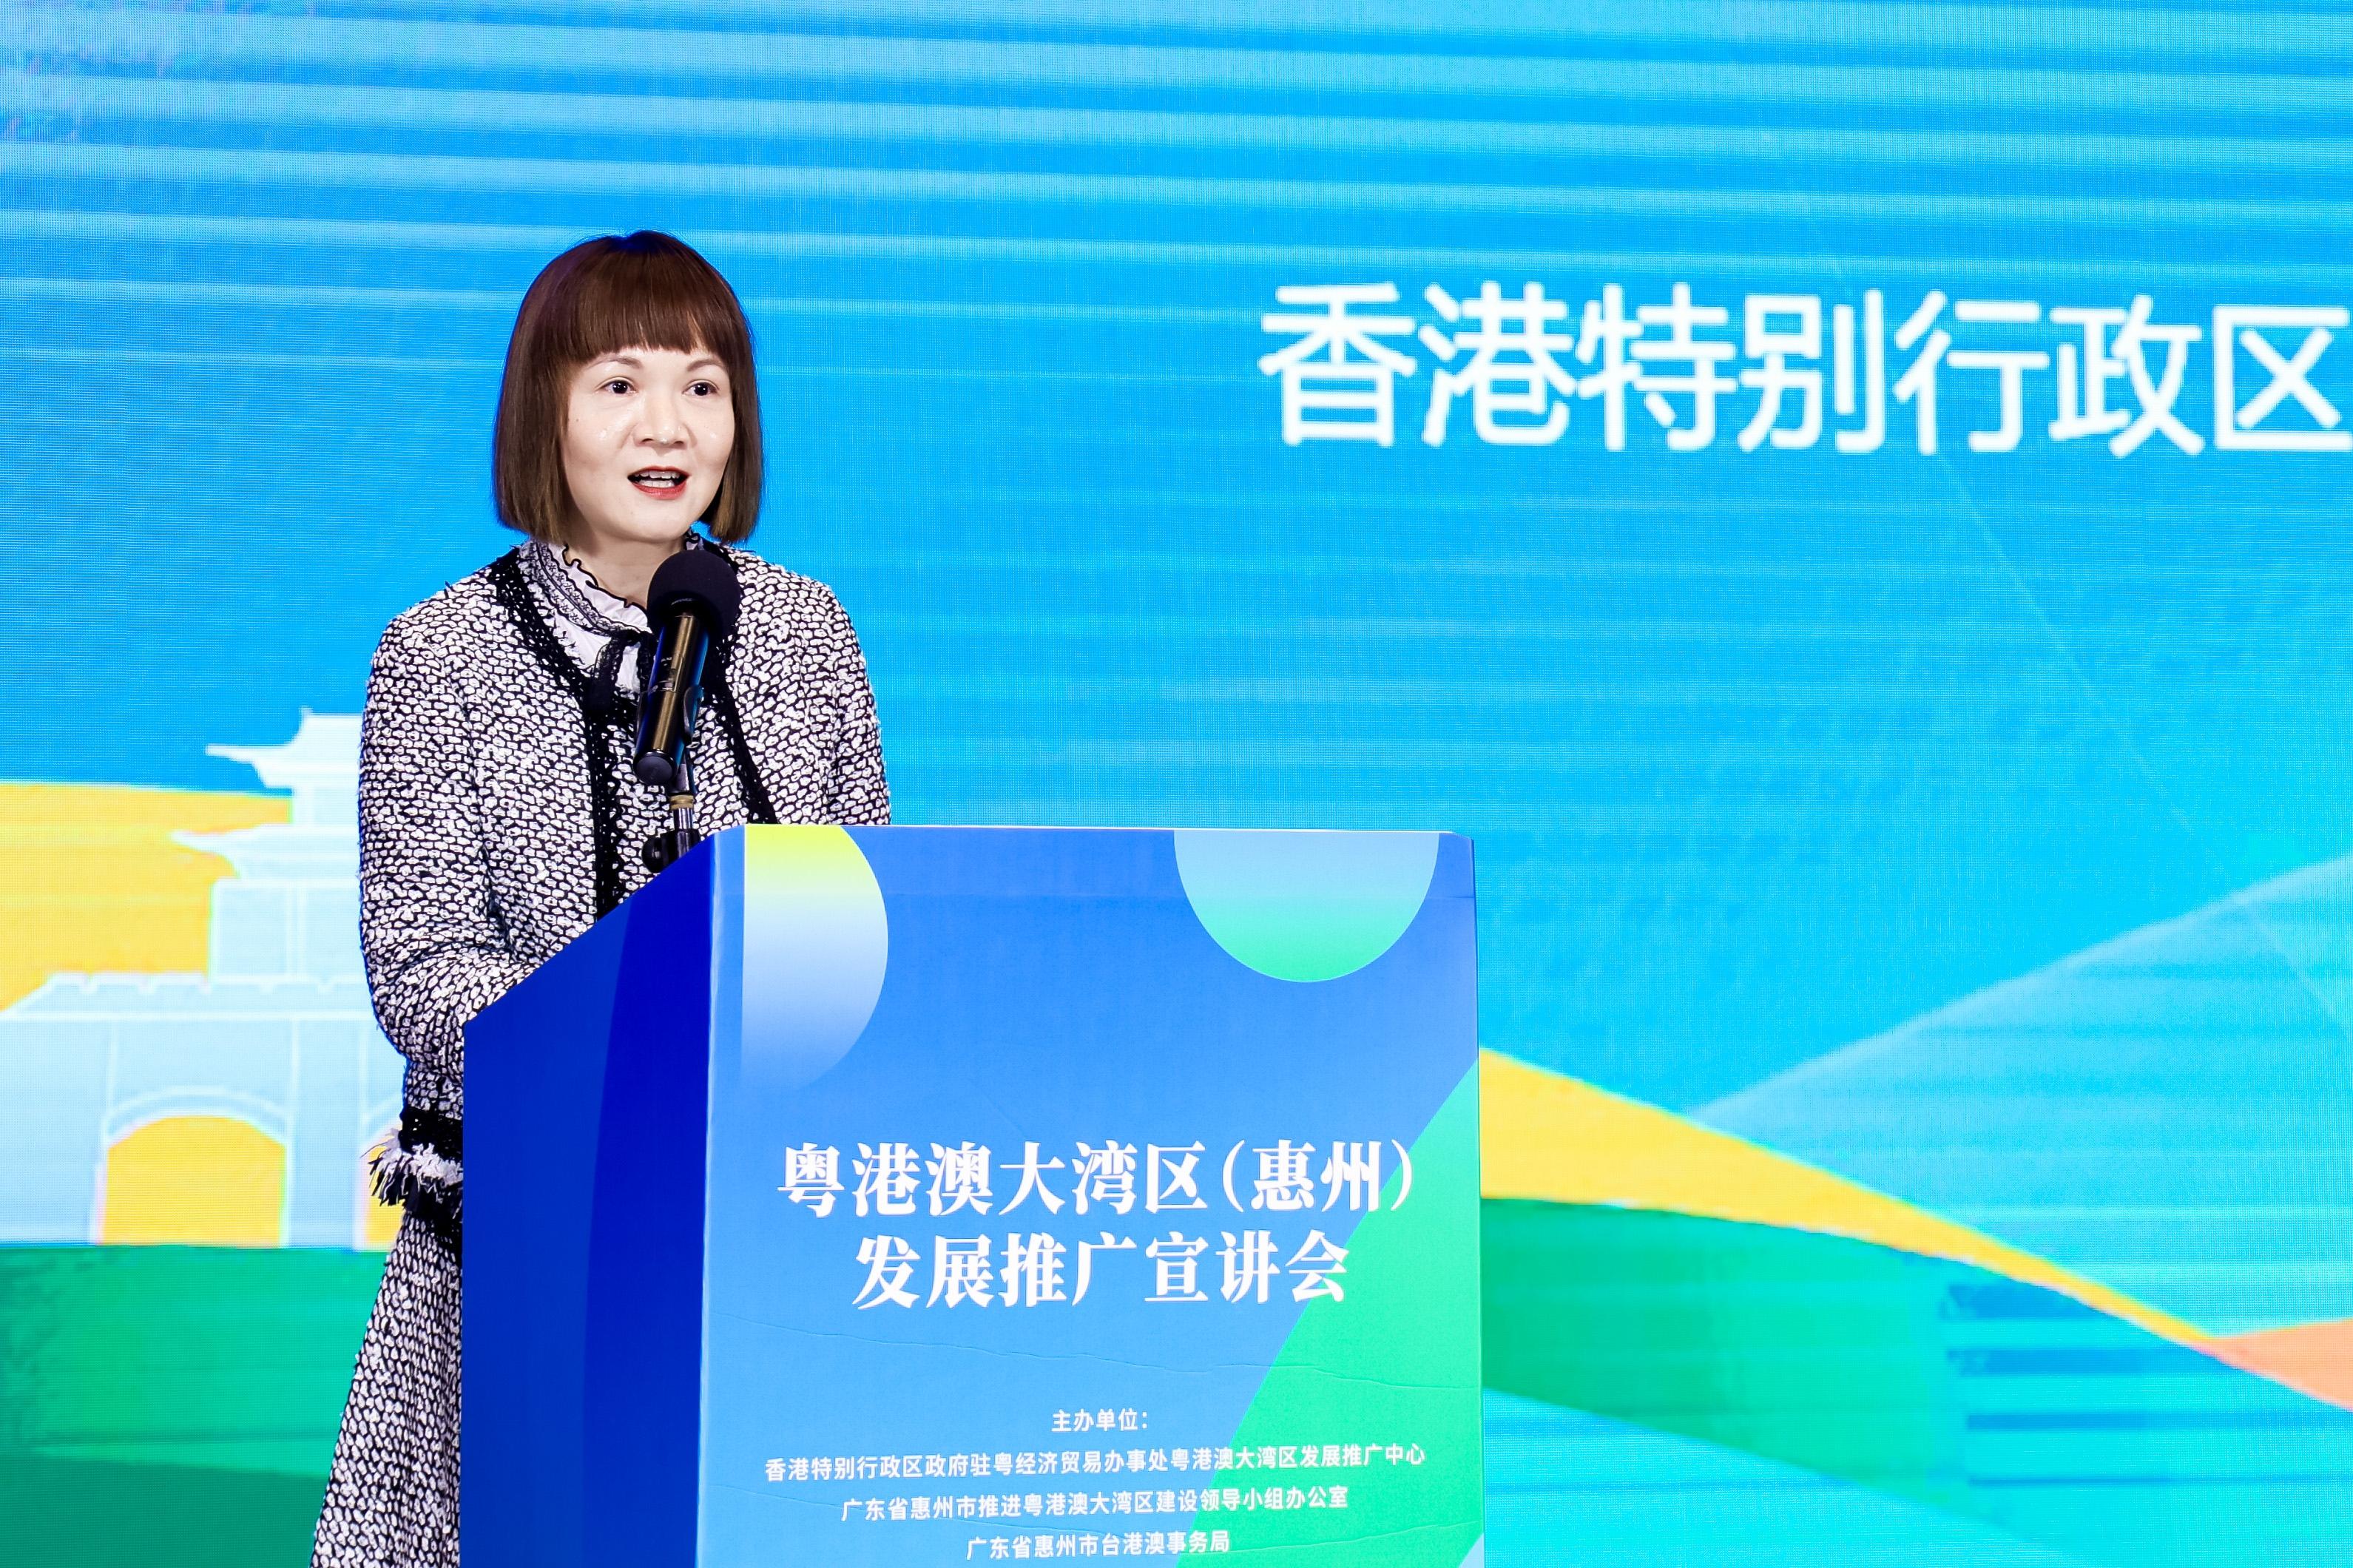 The Commissioner for the Development of the Guangdong-Hong Kong-Macao Greater Bay Area, Ms Maisie Chan, speaks at the Symposium for Promoting the Development of the Guangdong-Hong Kong-Macao Greater Bay Area in Huizhou today (October 17).